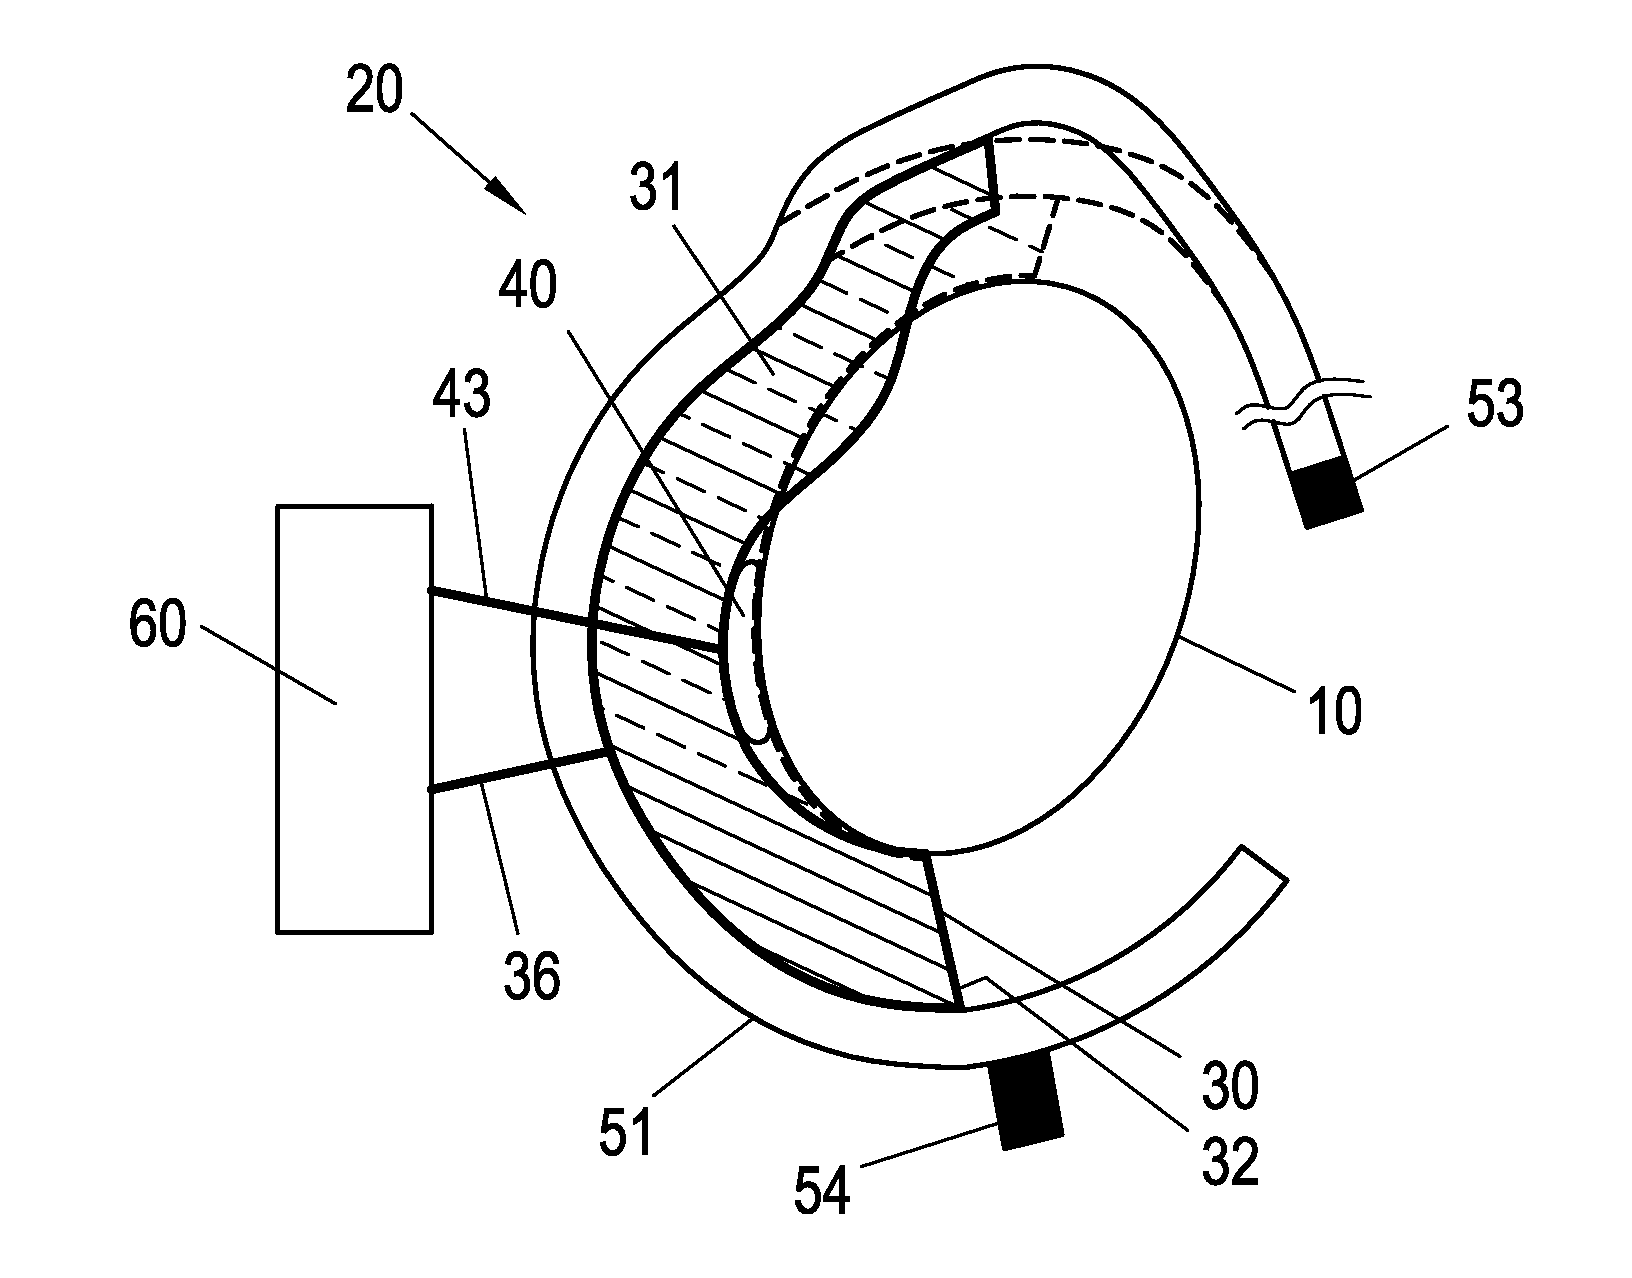 Blood Pressure Measuring Device and Method for Measuring the Blood Pressure of a Living Being